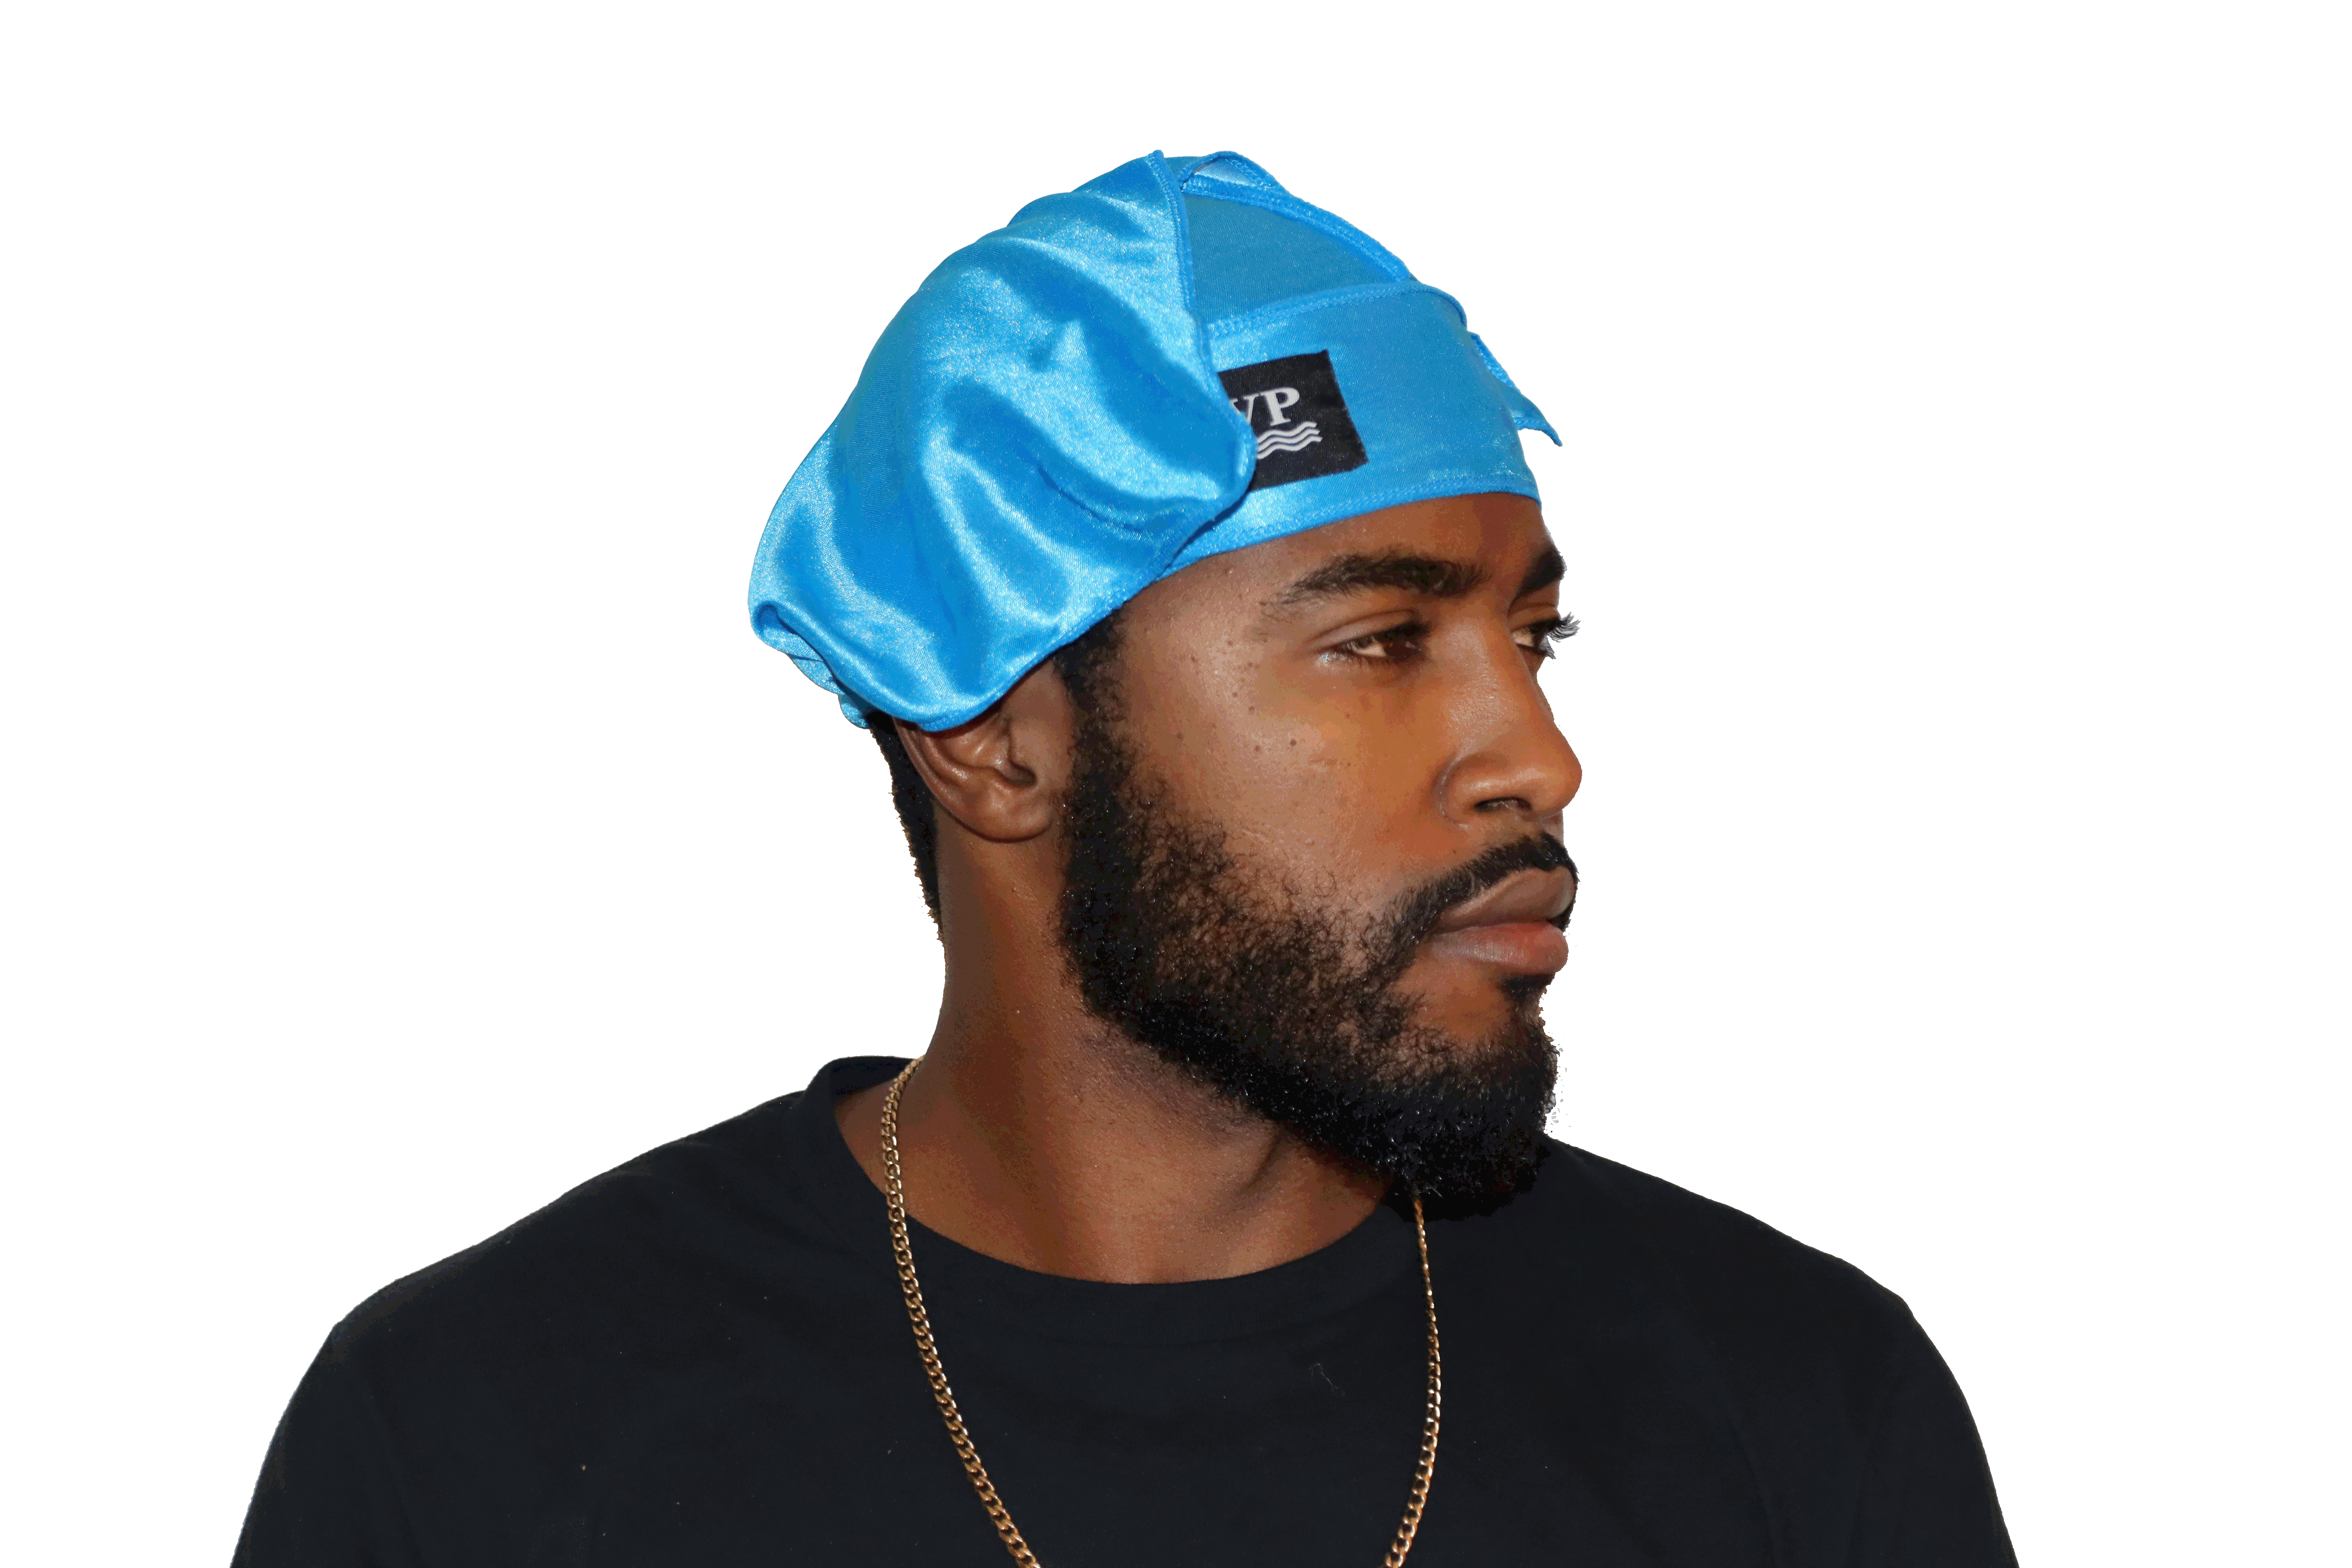 Silver and light blue durag